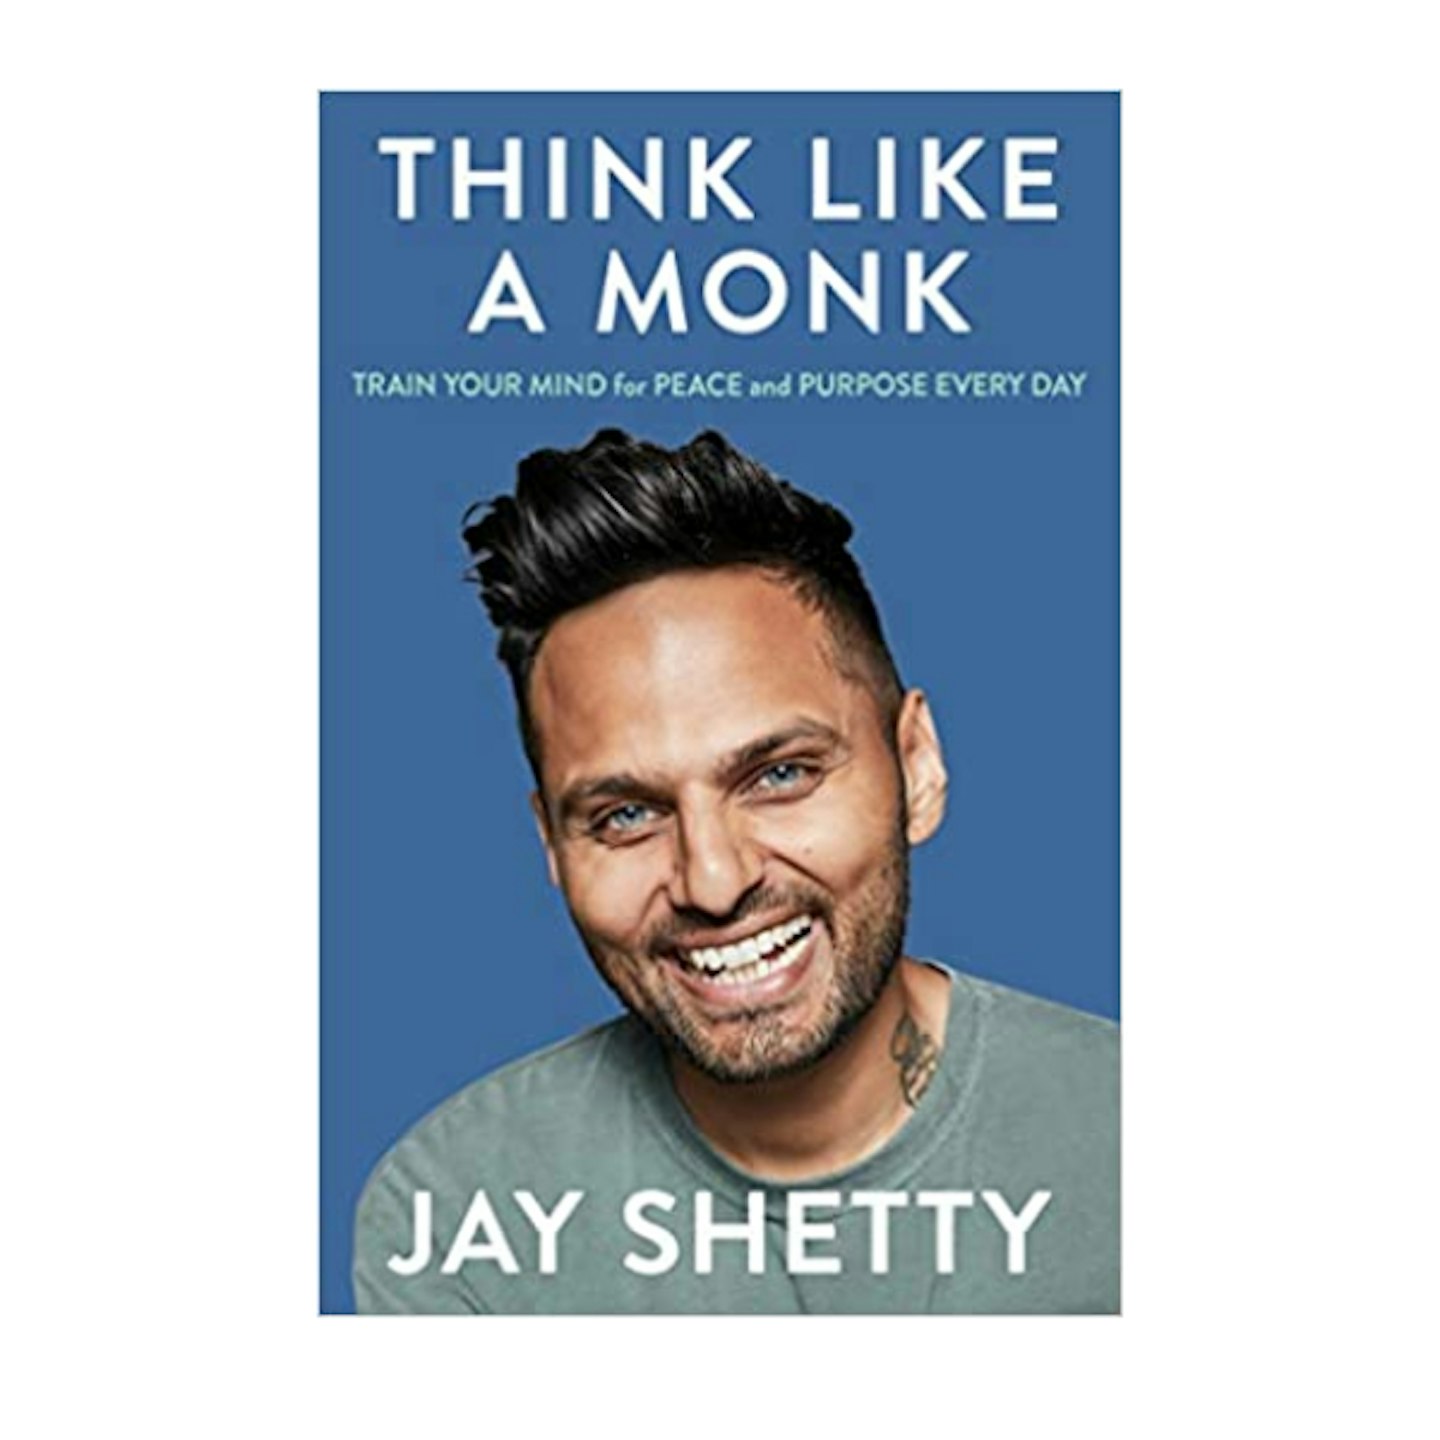 Think like a monk book cover